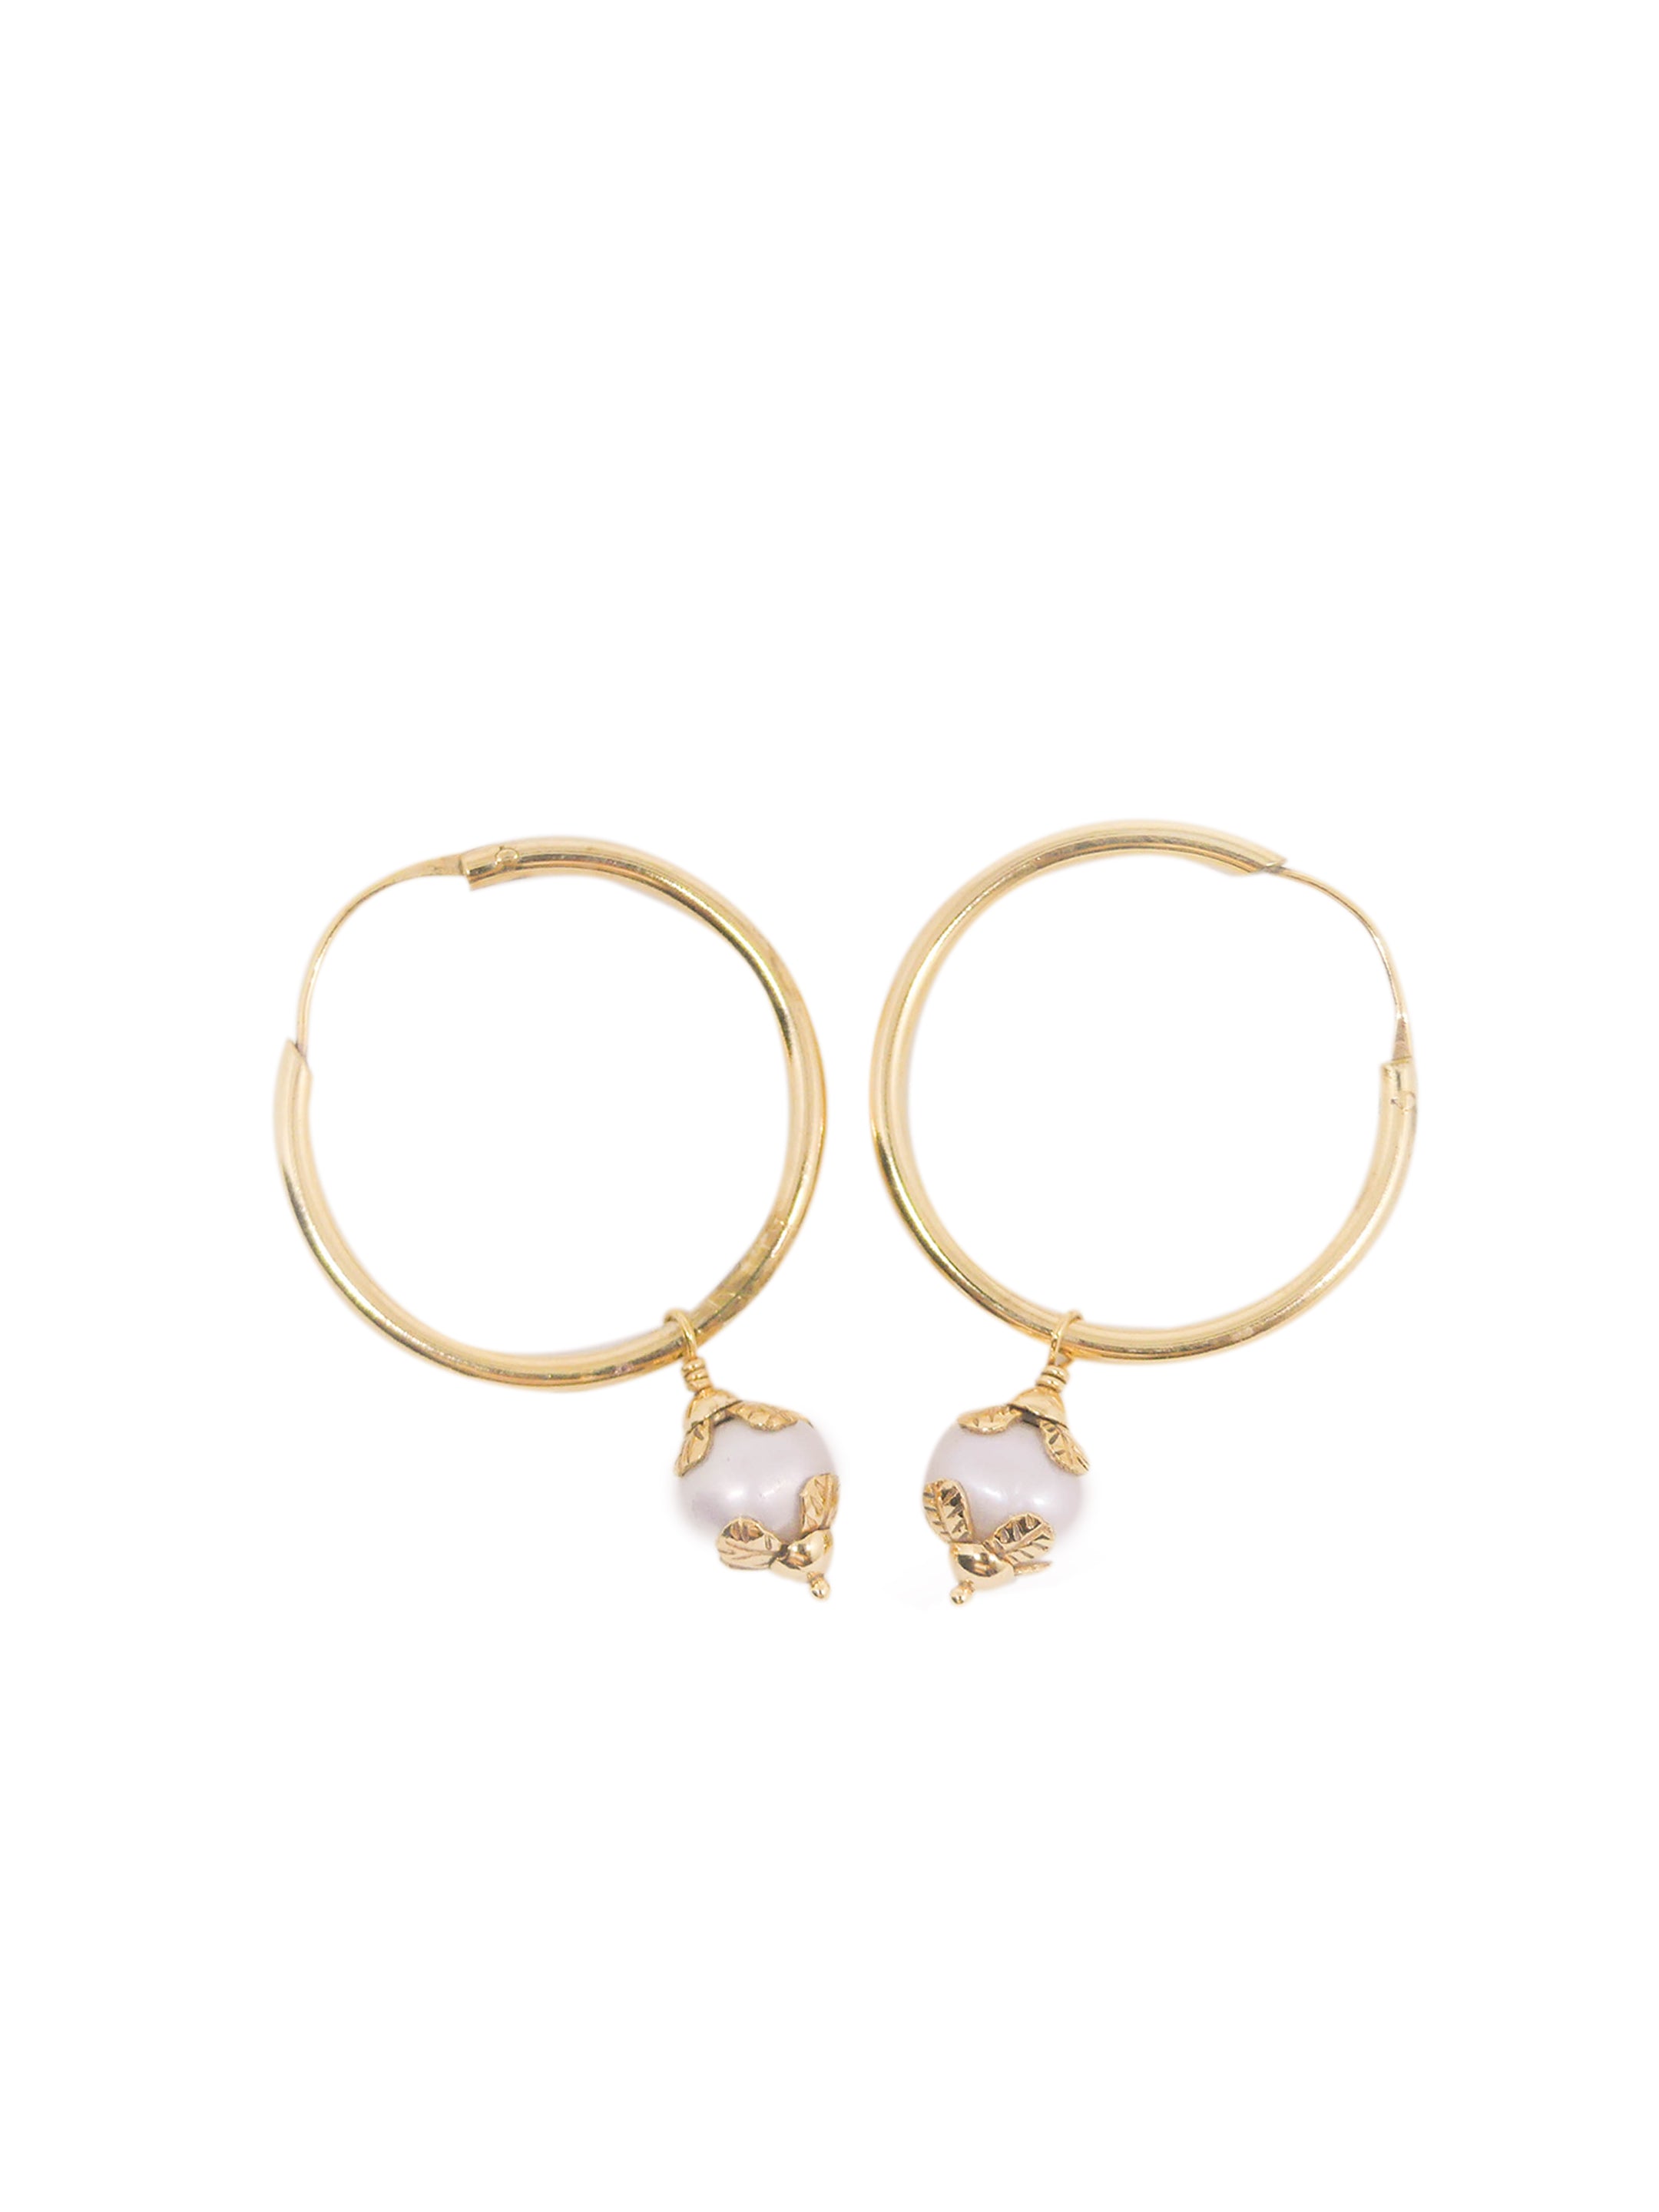 The PEROLA Earrings - The World Of Indah